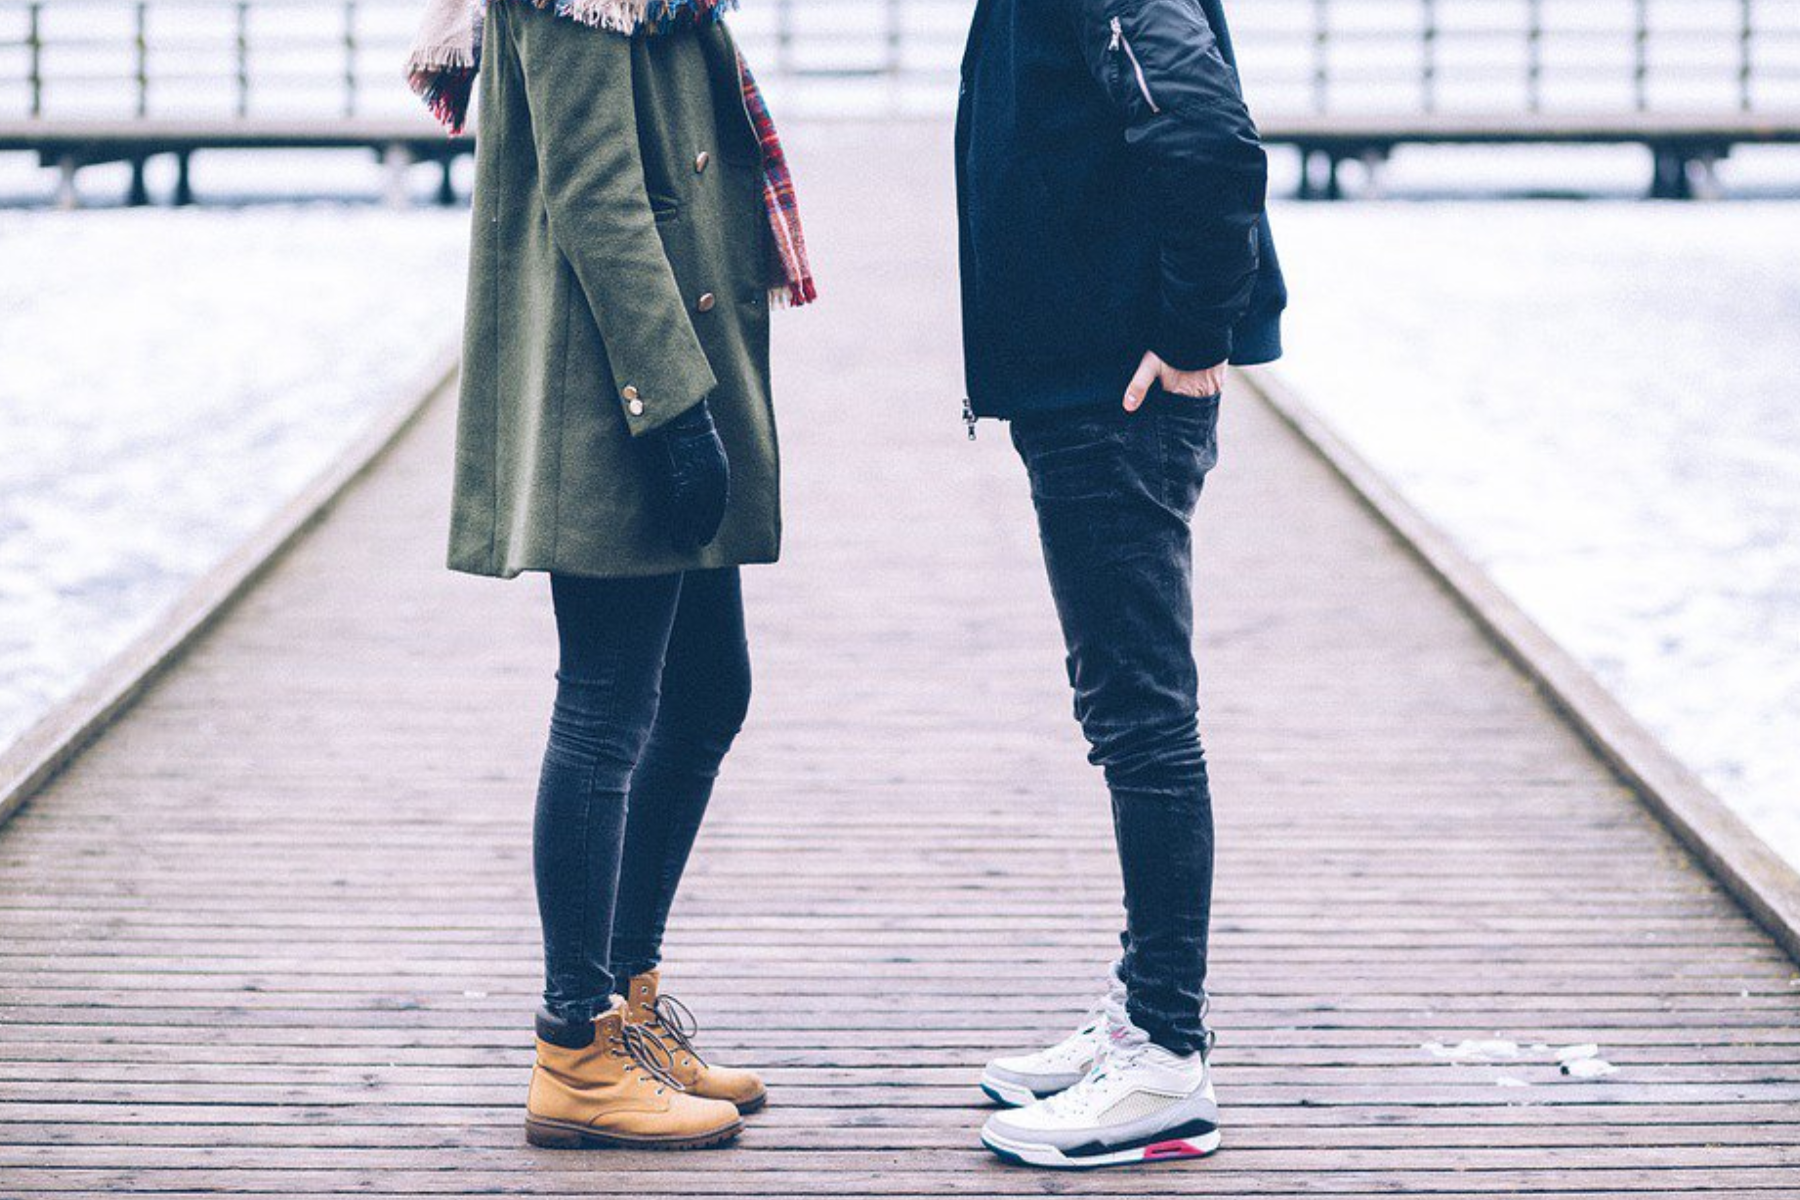 A woman and a man stand on a boardwalk facing each other